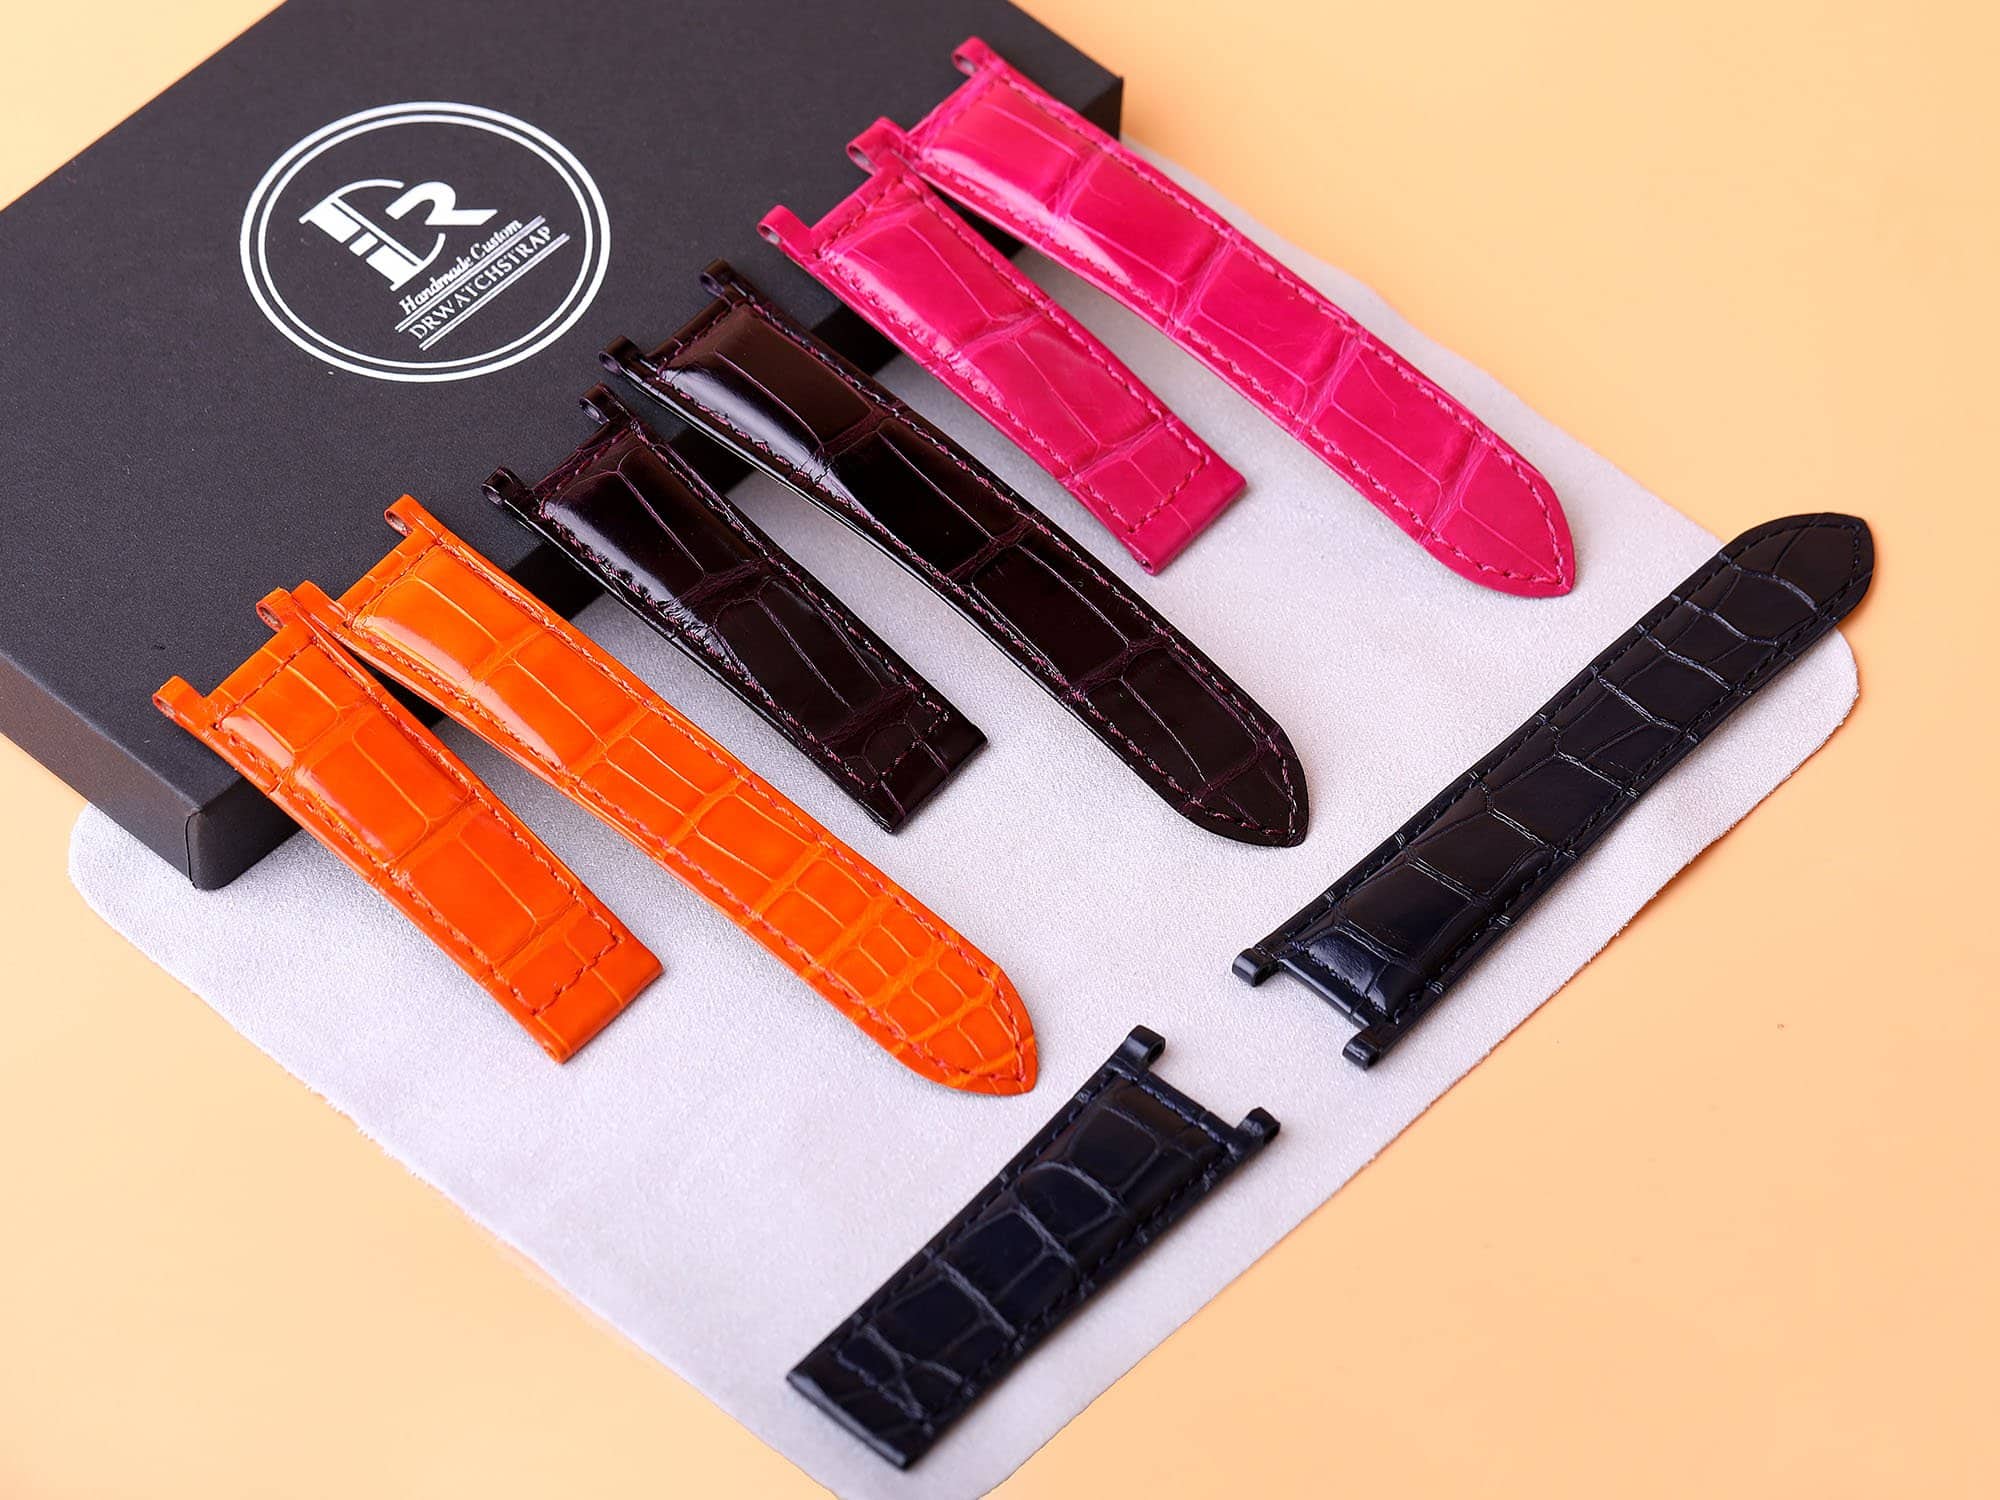 18mm 20mm Genuine best quality American Alligator Orange Pink Black Blue leather watch strap and watch band replacement for Cartier De Pasha watches from DR Watchstrap - Shop the 100% handmade crocodile leather straps and watch bands online at a low price